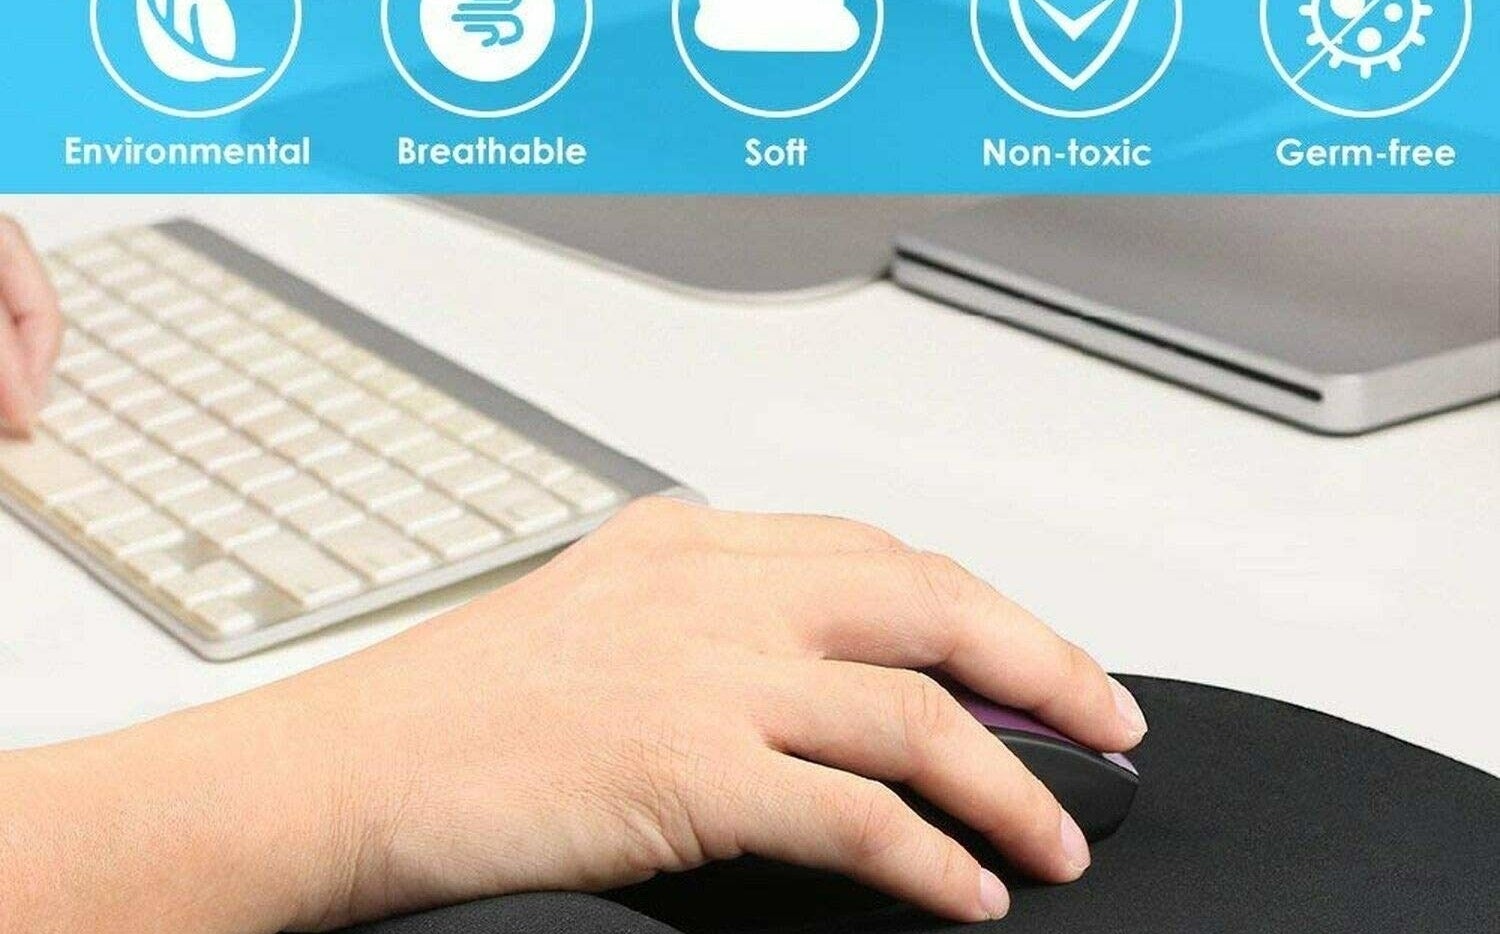 A person using a mouse on an ergonomic pad next to a keyboard